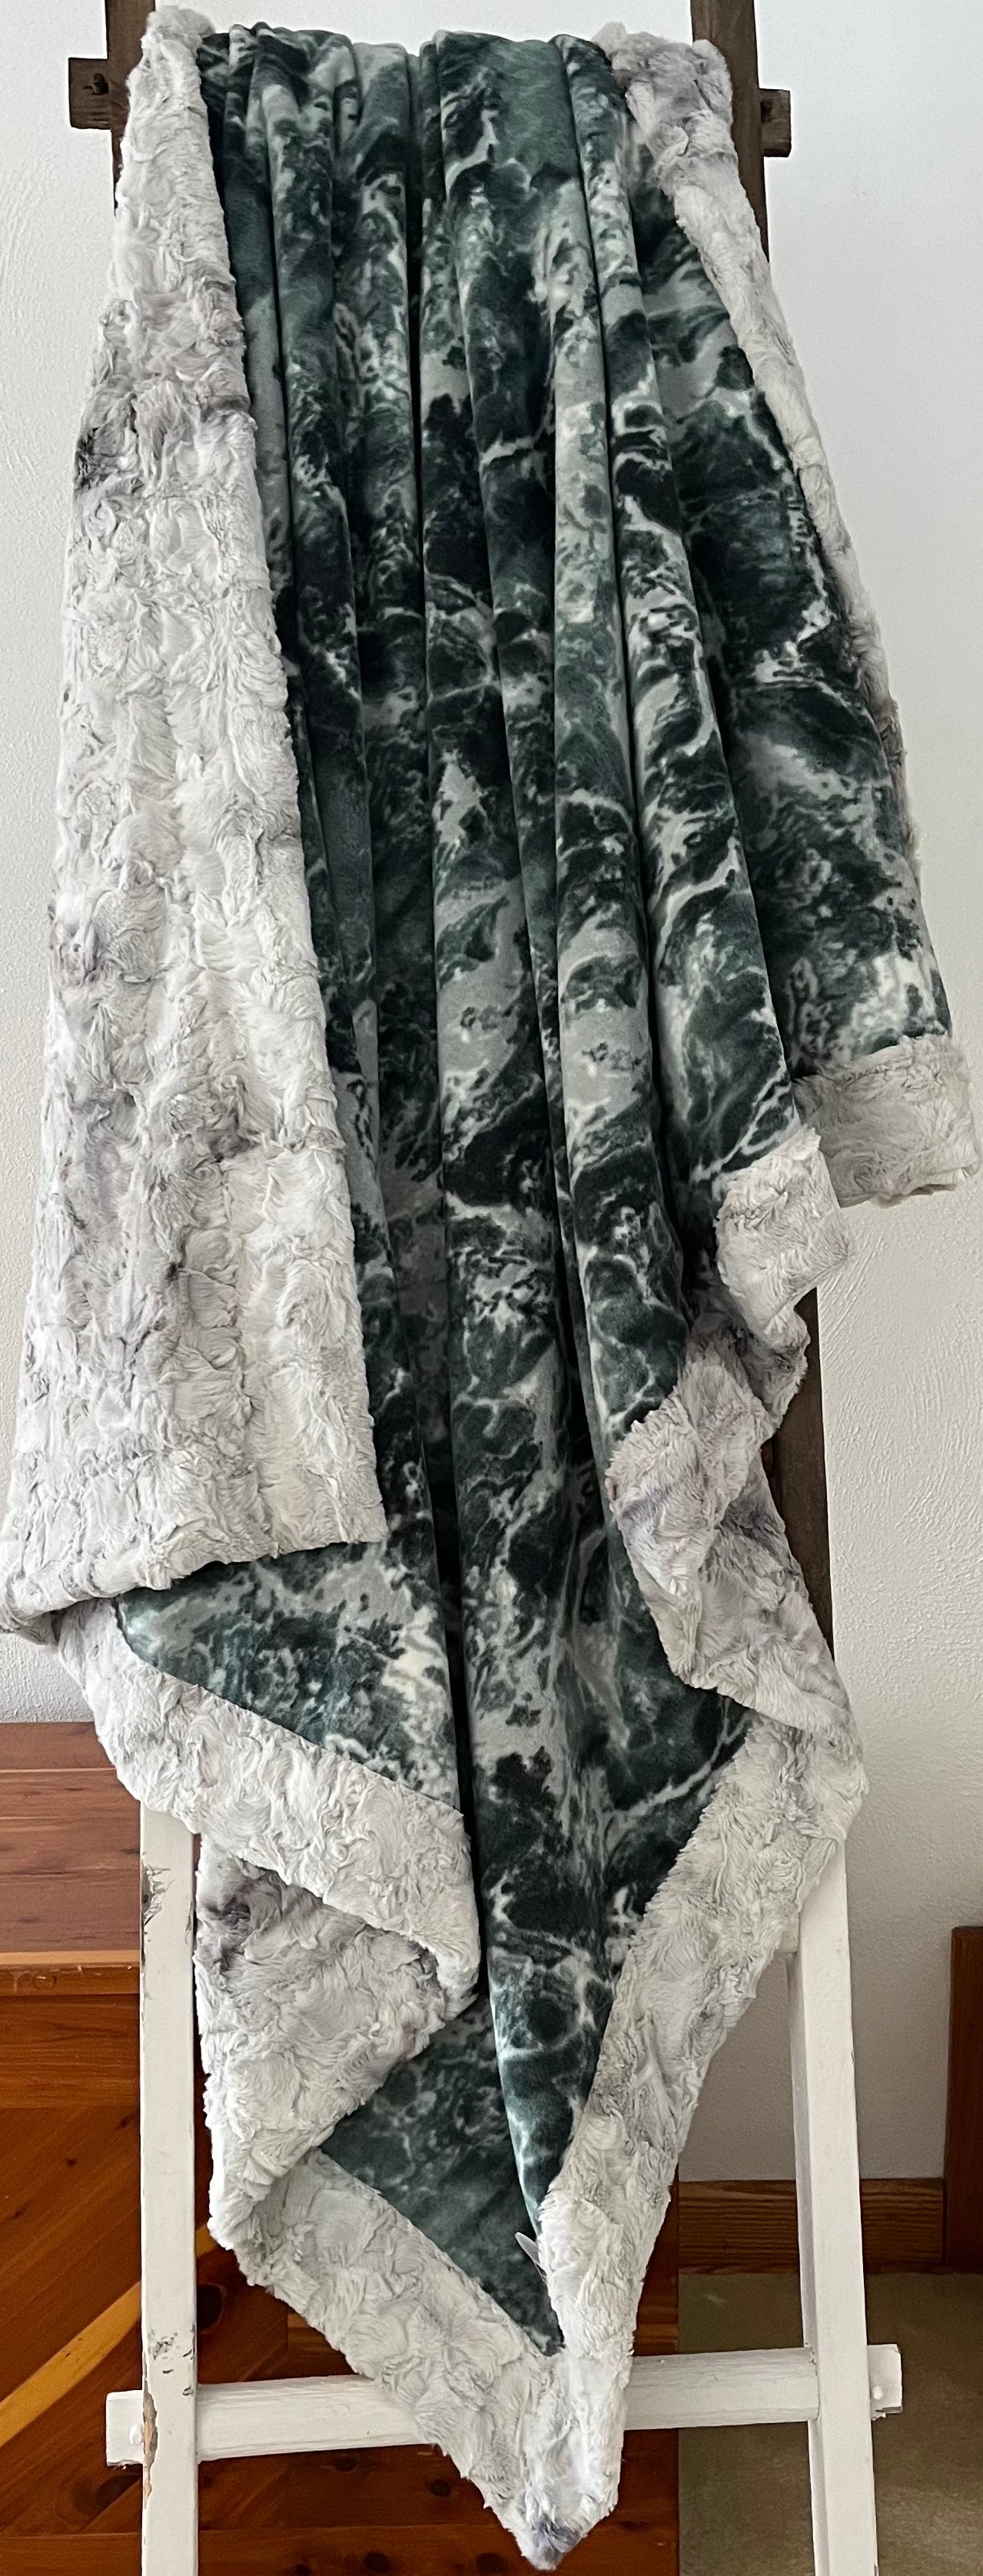 Marbled Greens Adult Throw